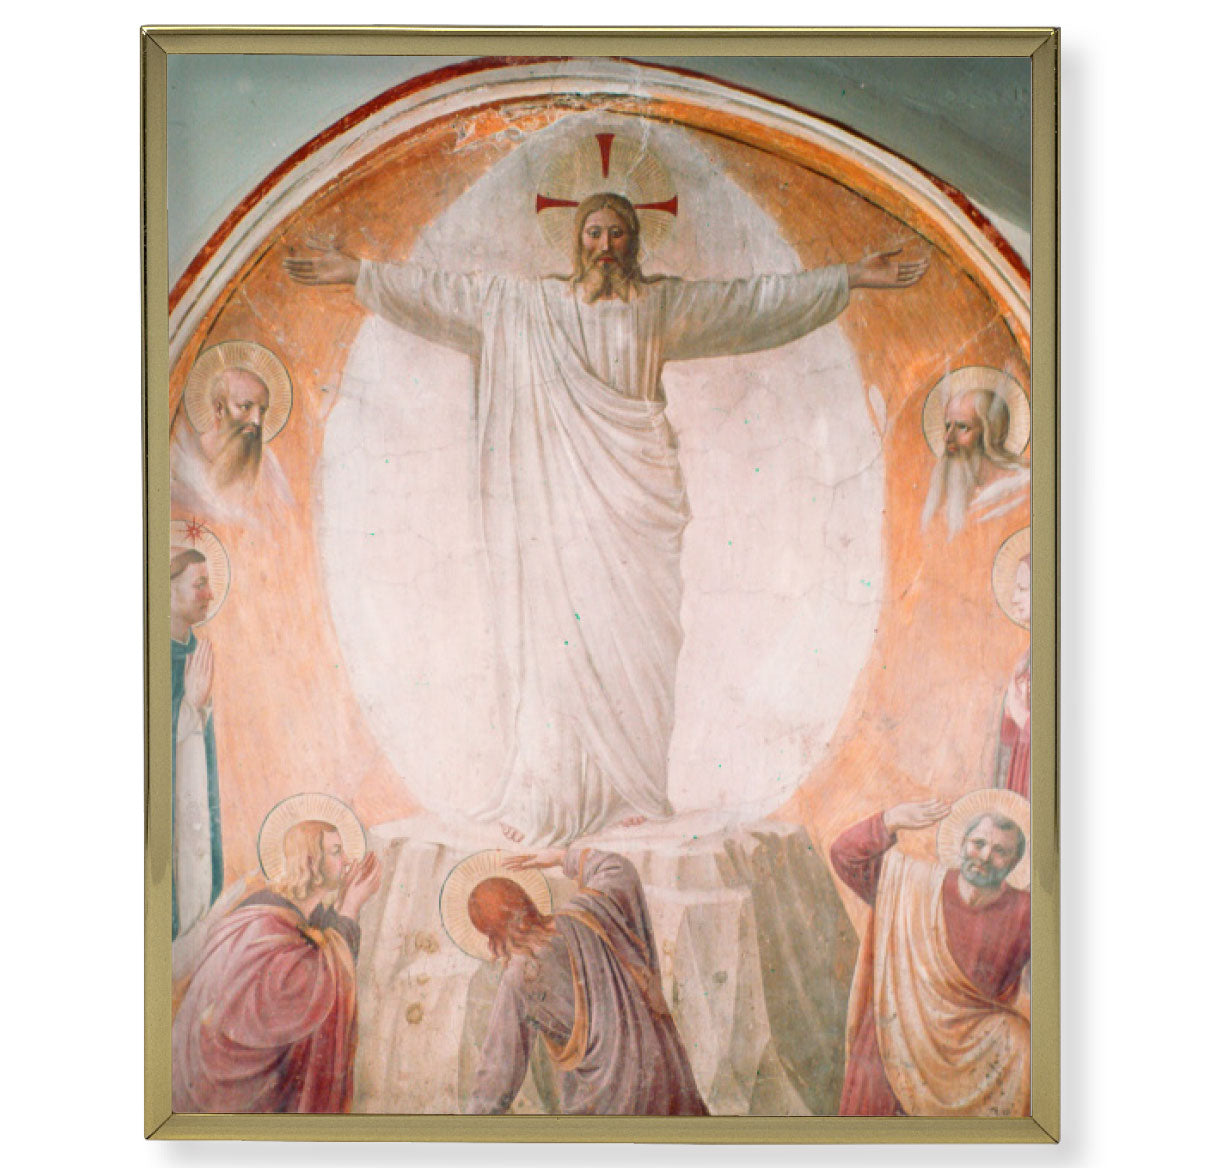 Transfiguration of Christ Picture Framed Plaque Wall Art Decor Medium, Bright Gold Finished Trimmed Plaque